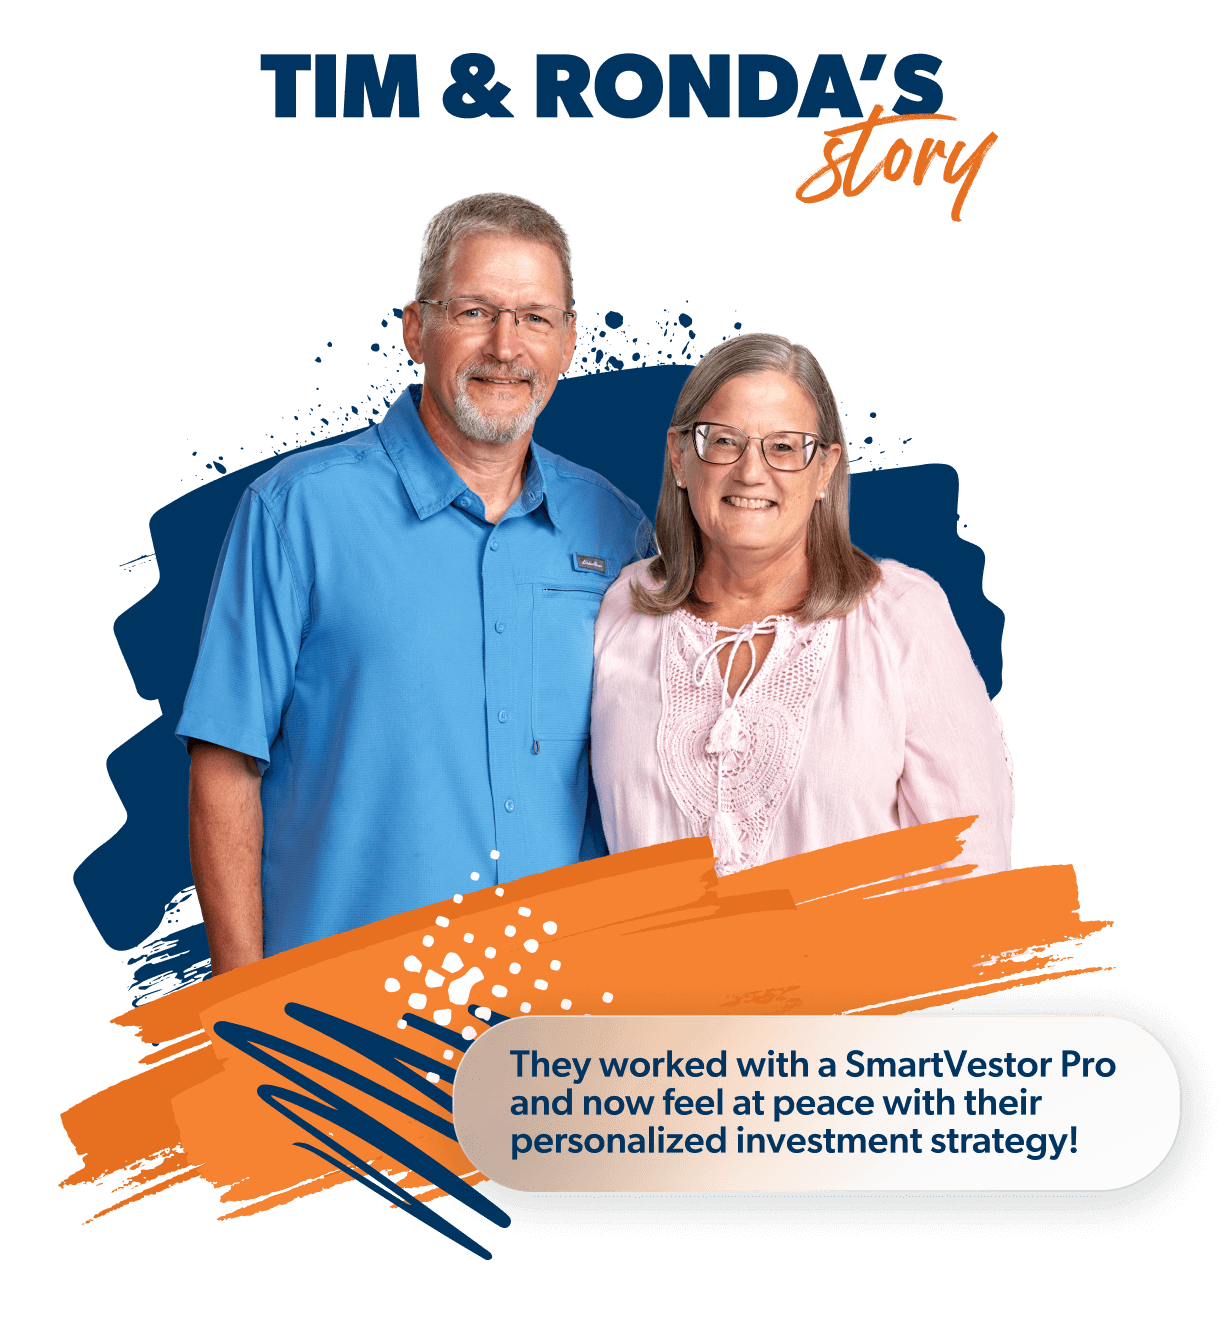 Tim & Ronda's Story: They worked with a SmartVestor Pro  and now feel at peace with their personalized investment strategy!